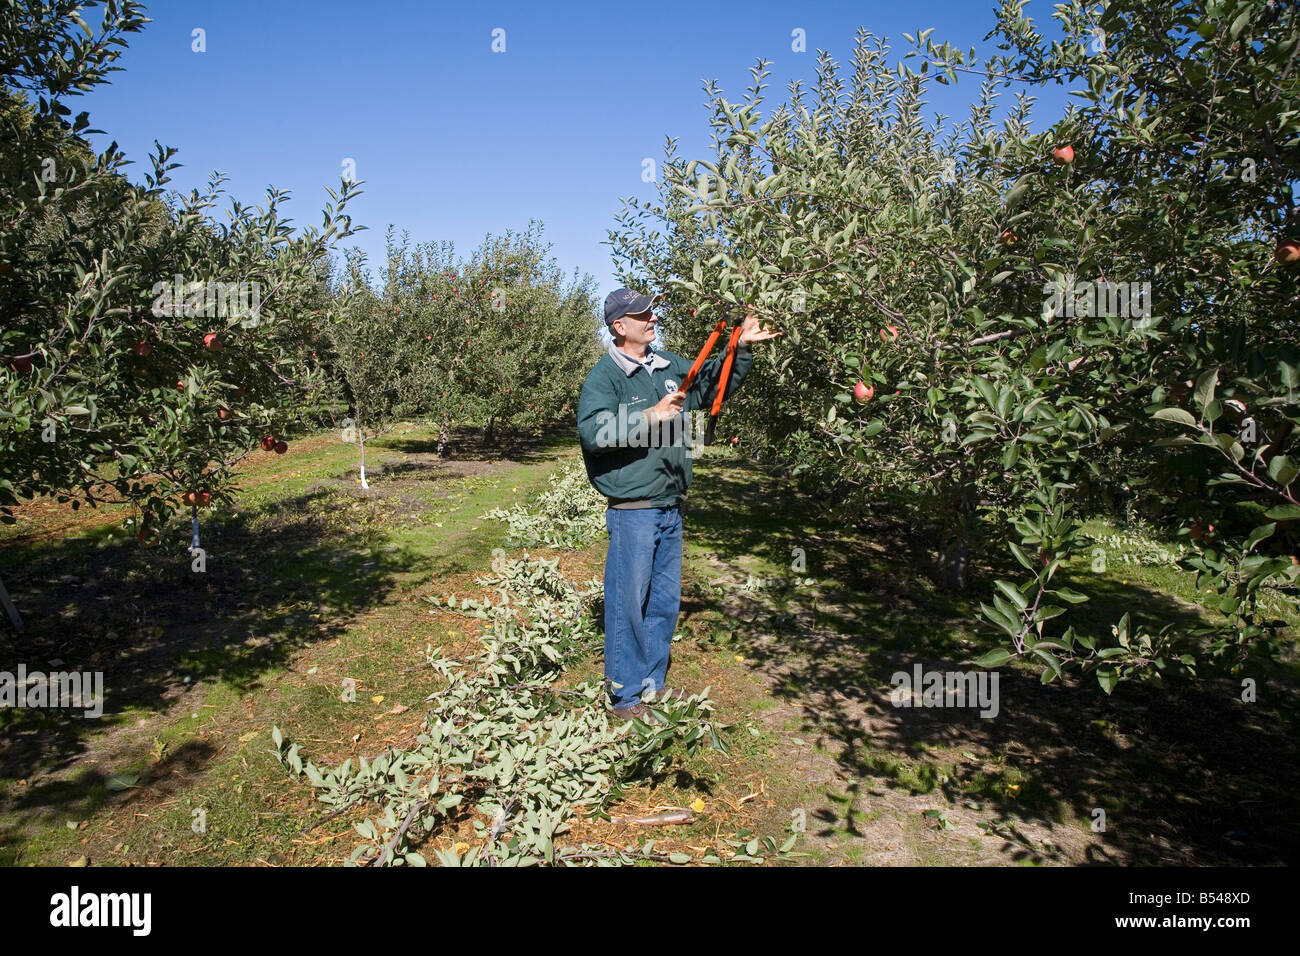 Worker Prunes Trees in Apple Orchard Stock Photo